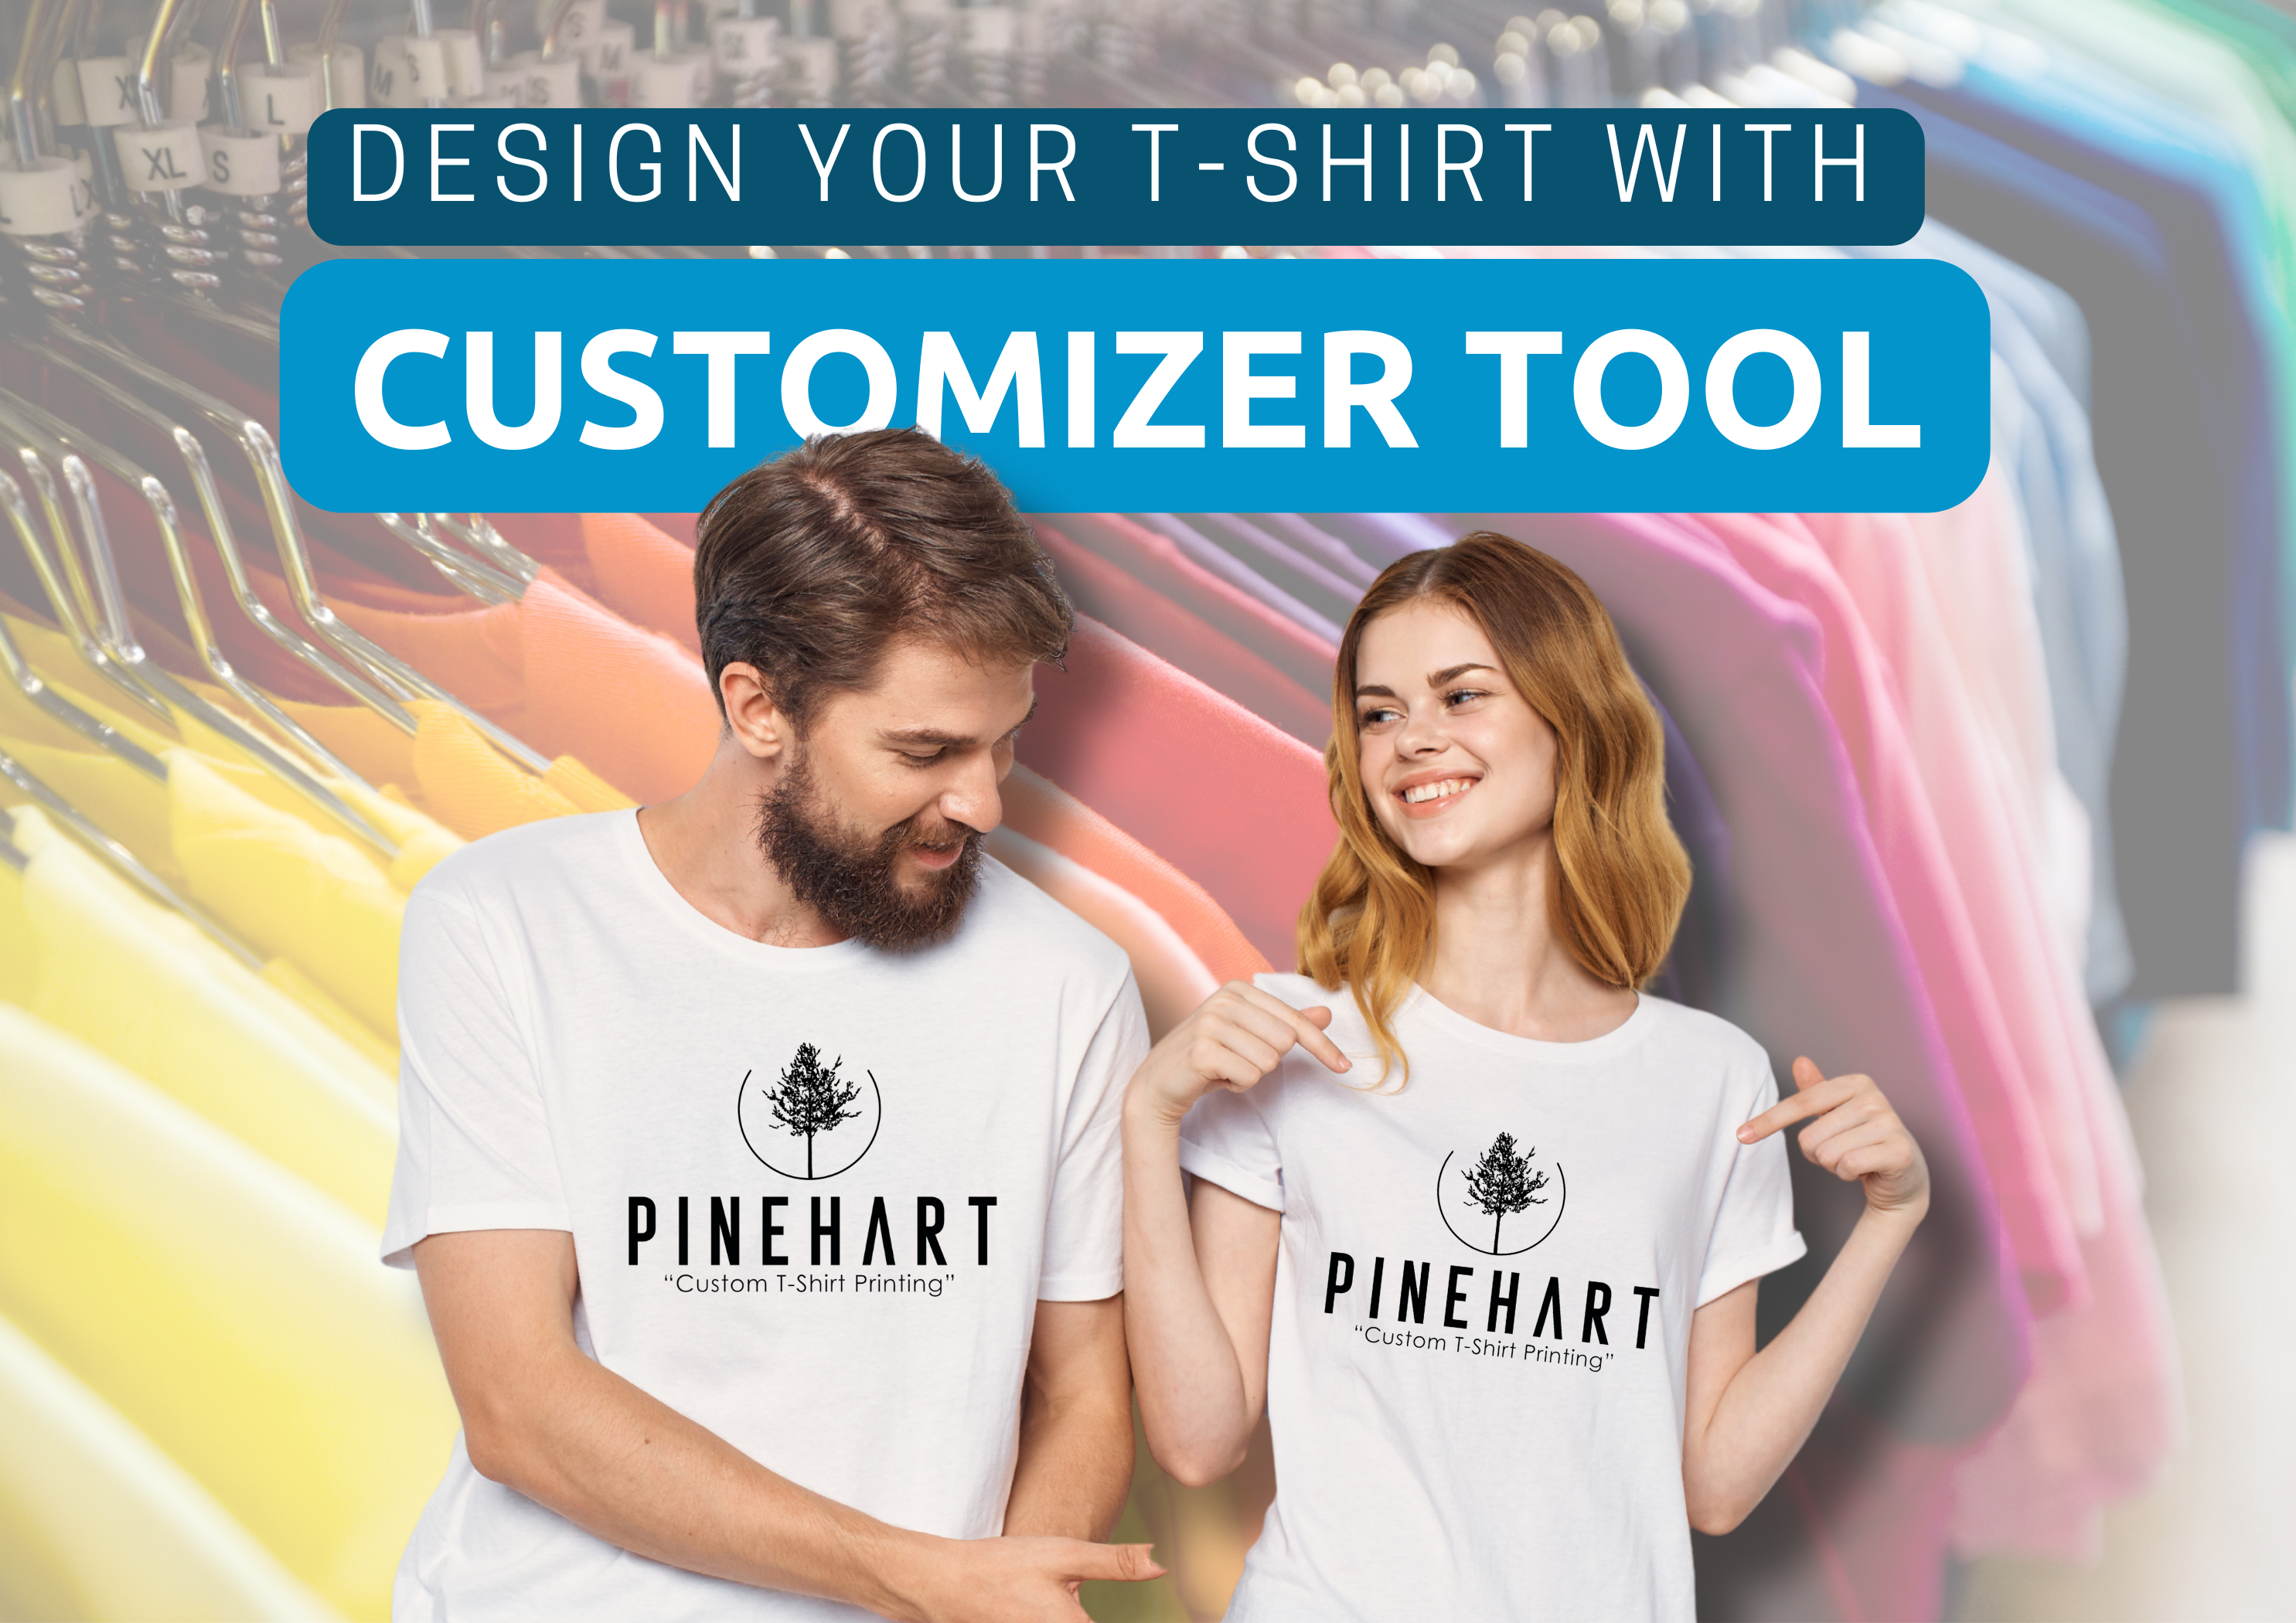 Design Your T-Shirt with Pinehart’s Perfect Customizer Tool in 6 Steps